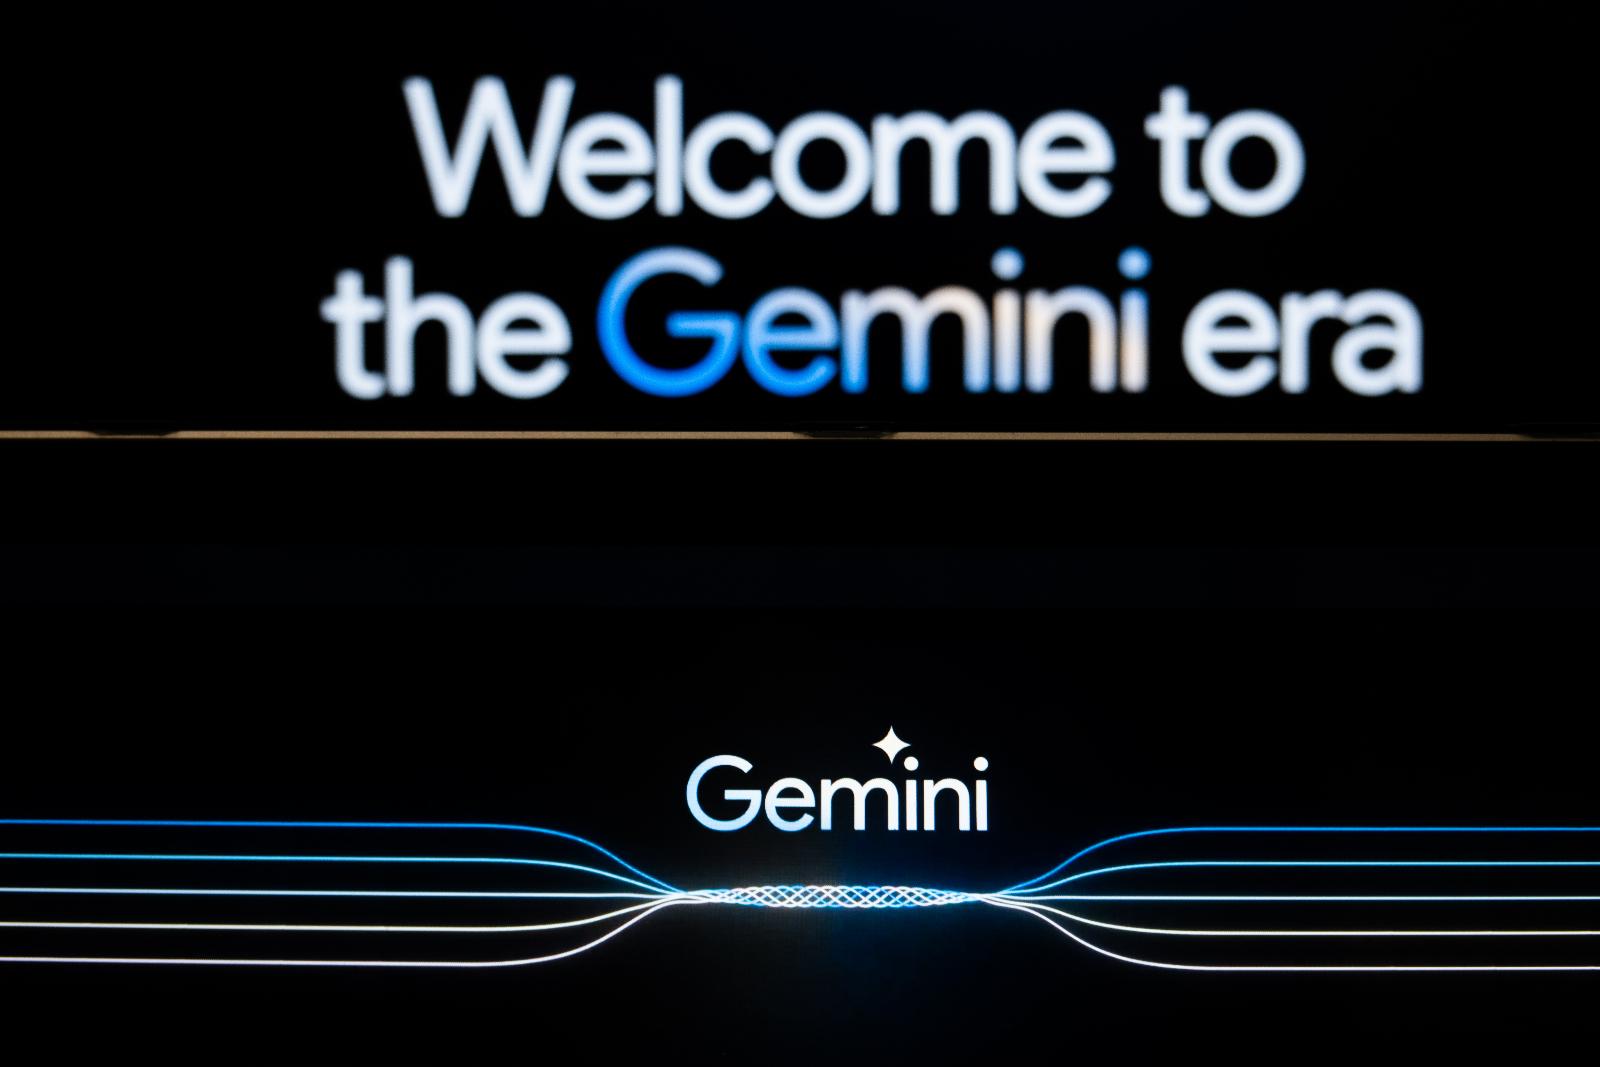 Google makes more Gemini models available to developers